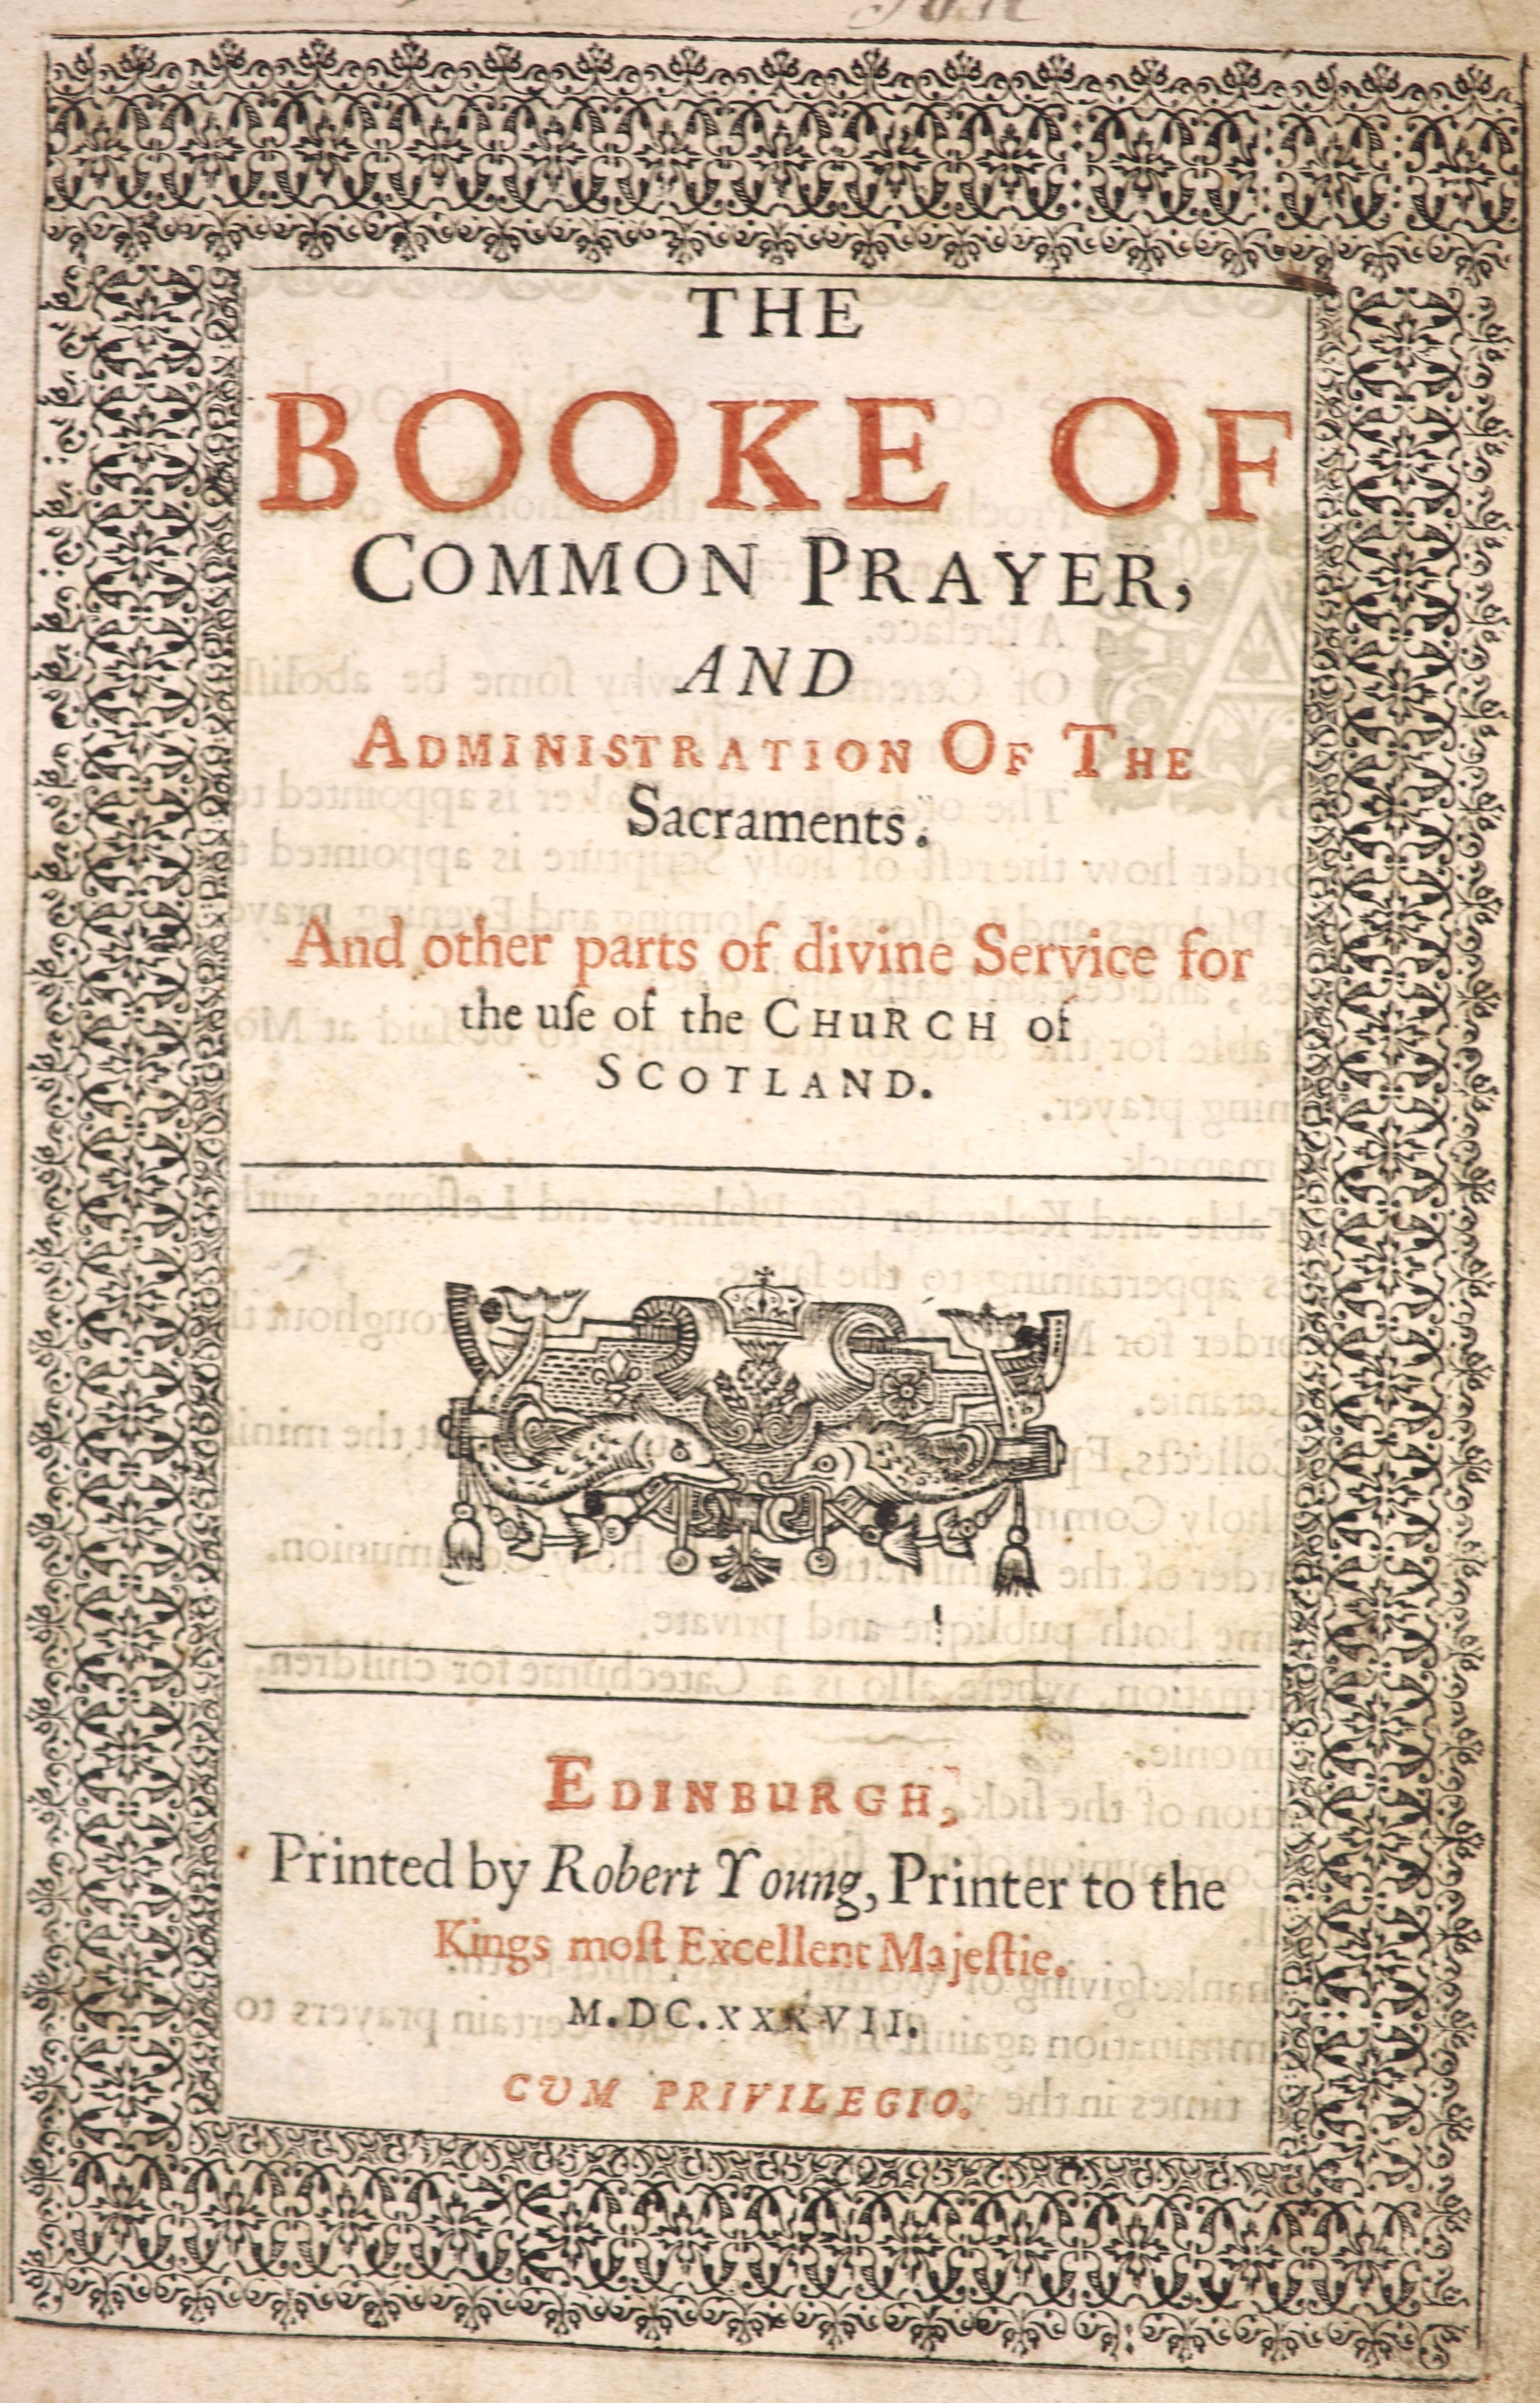 The Booke of Common Prayer ... for Use of the Church of Scotland. title (within an elaborate decorated border) printed in red and black with engraved device, head and tailpiece decorations